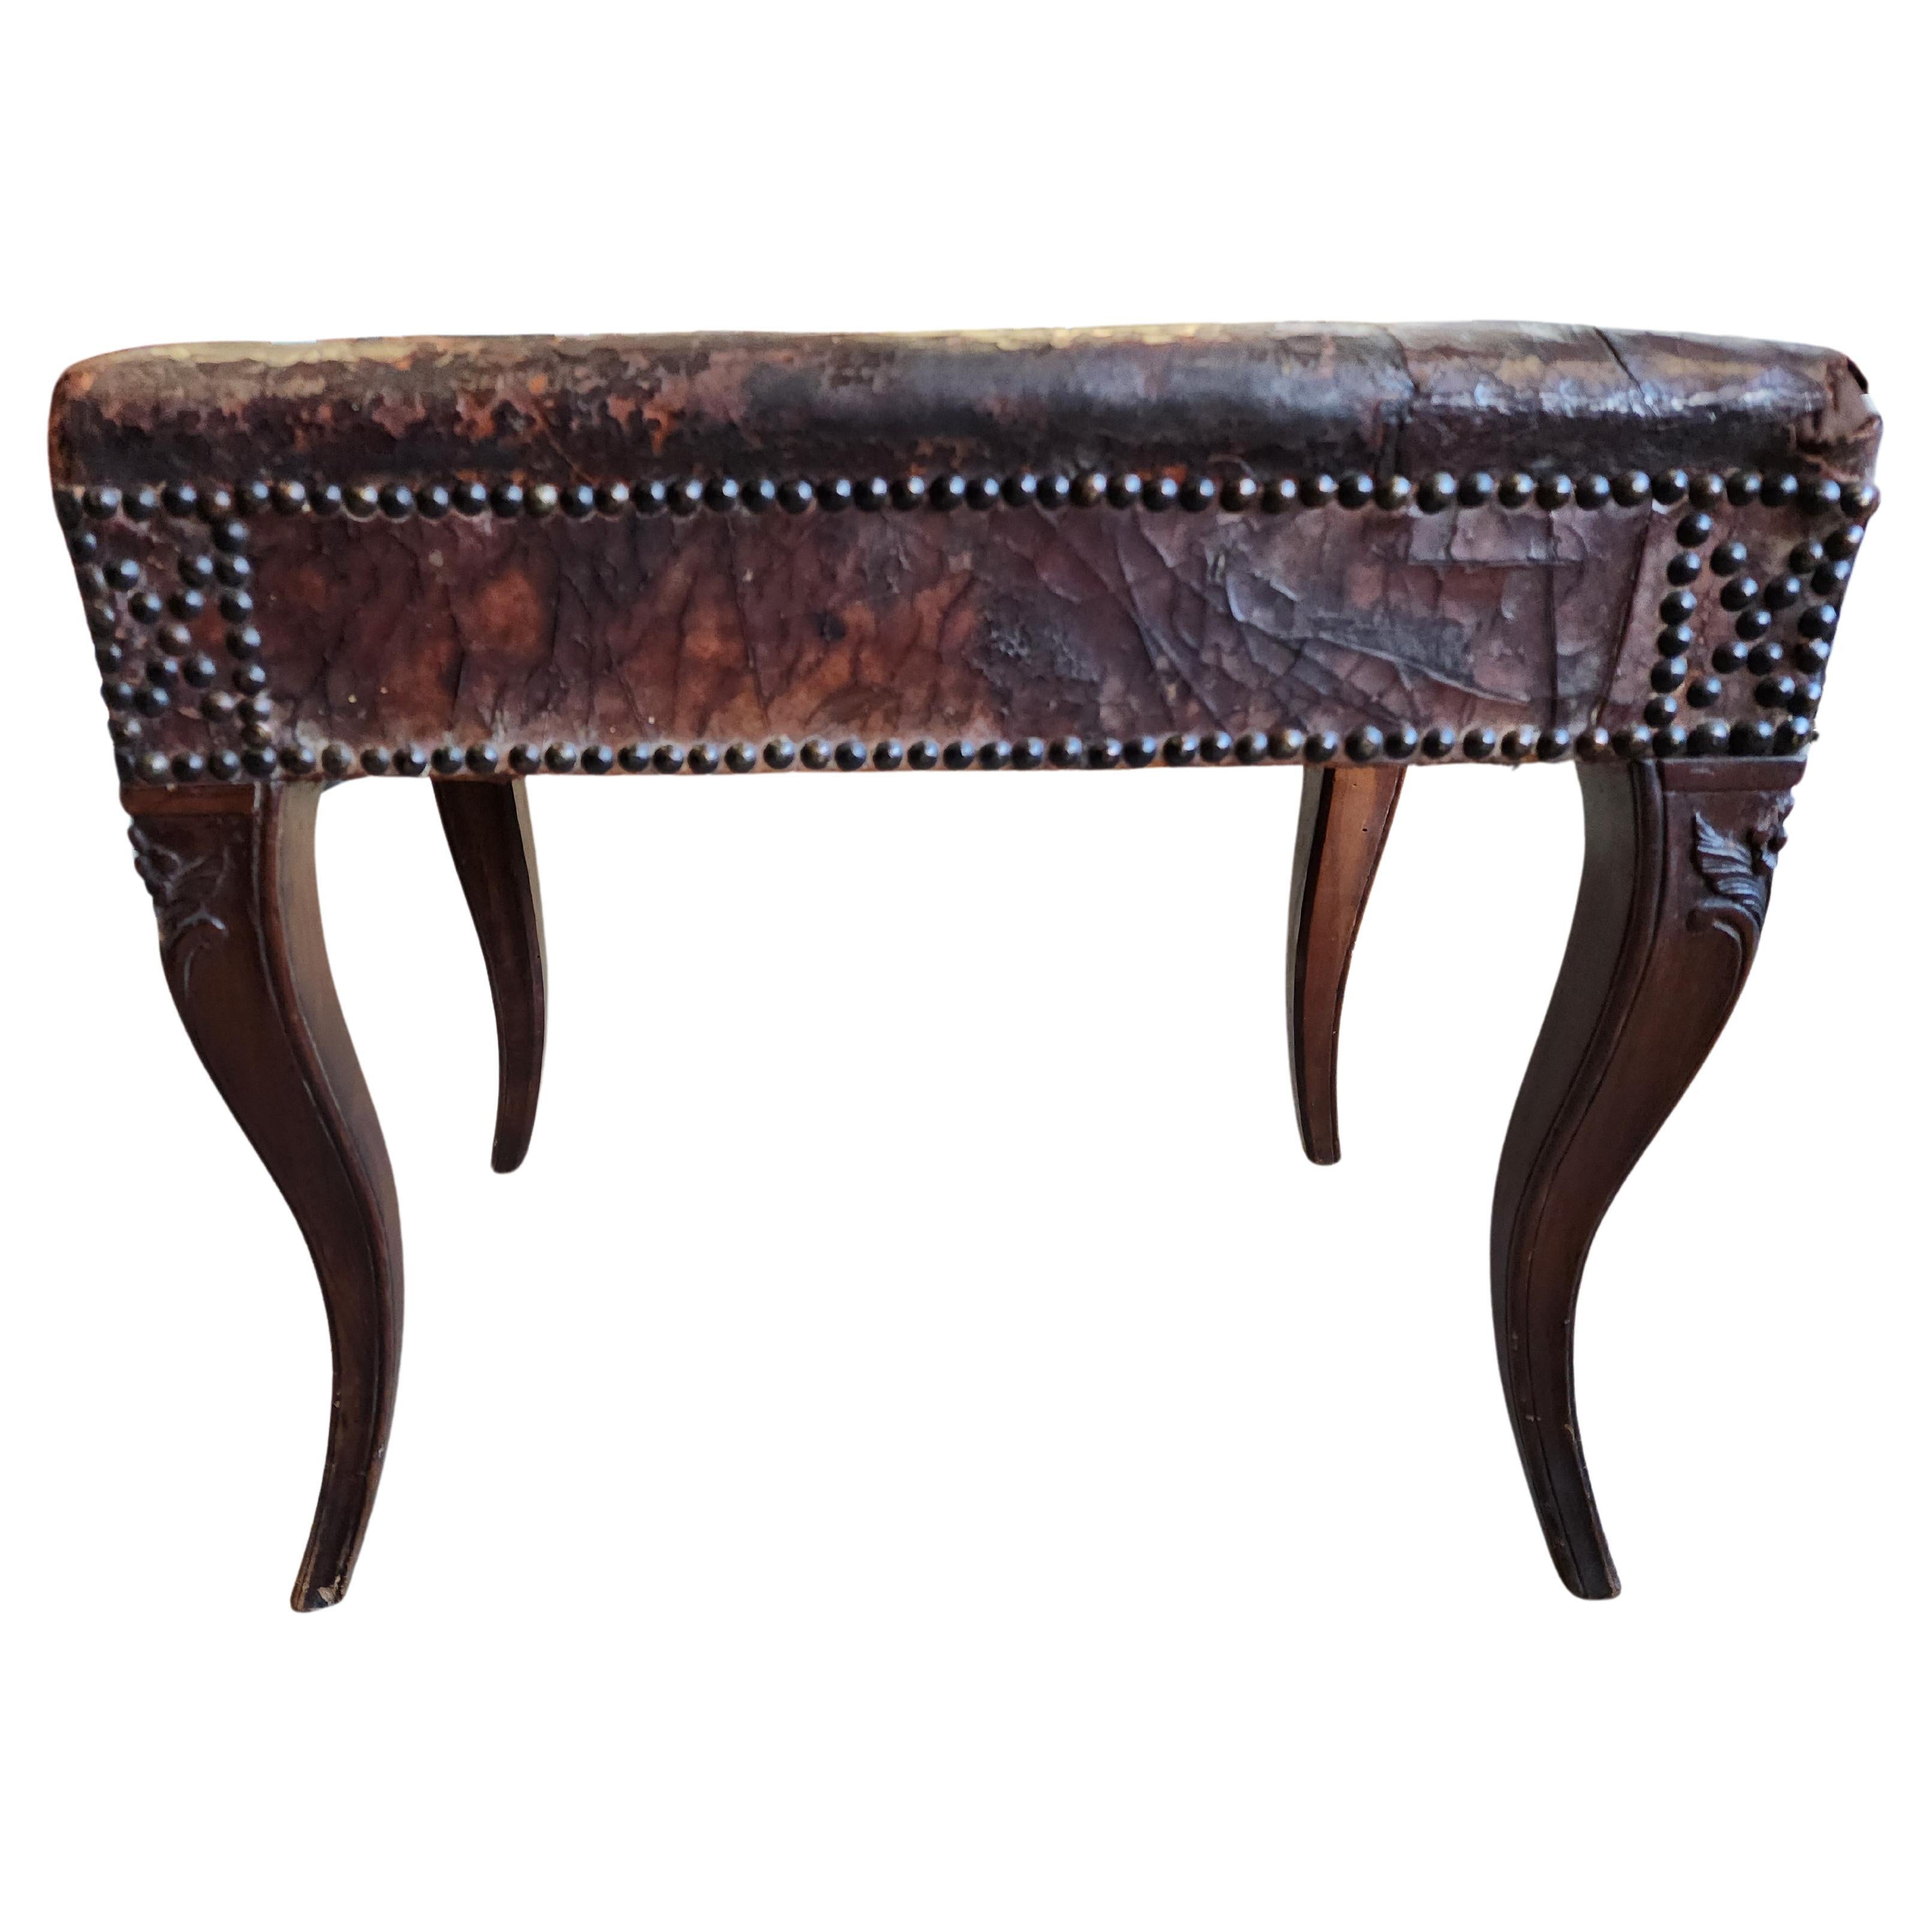 French 18th Century Carved Walnut Bench from Provence